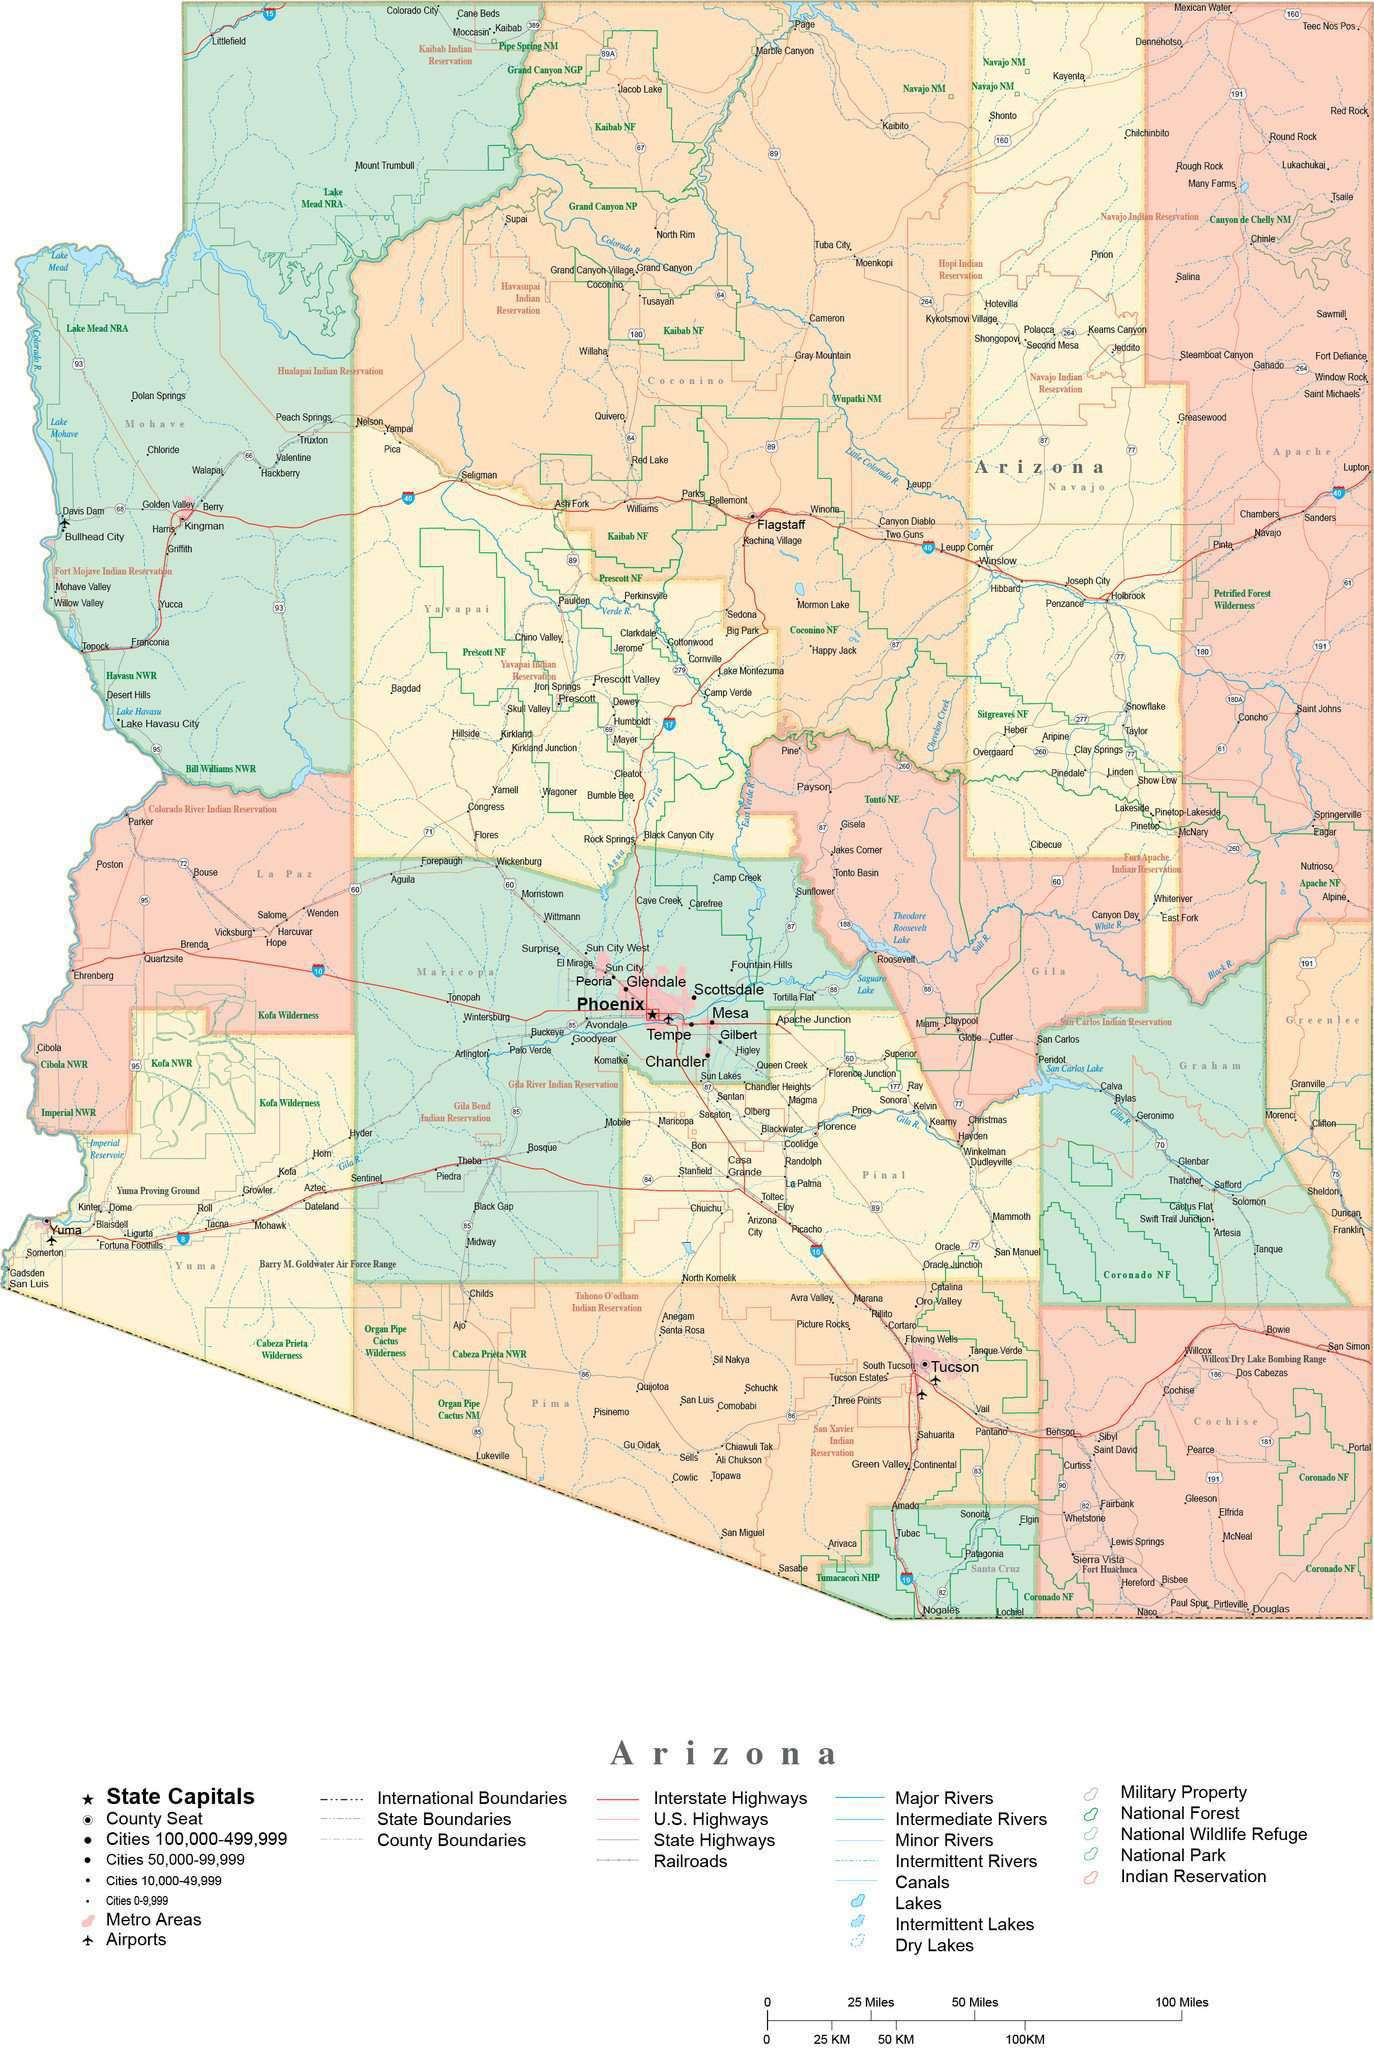 Arizona County Map With Cities - World Map